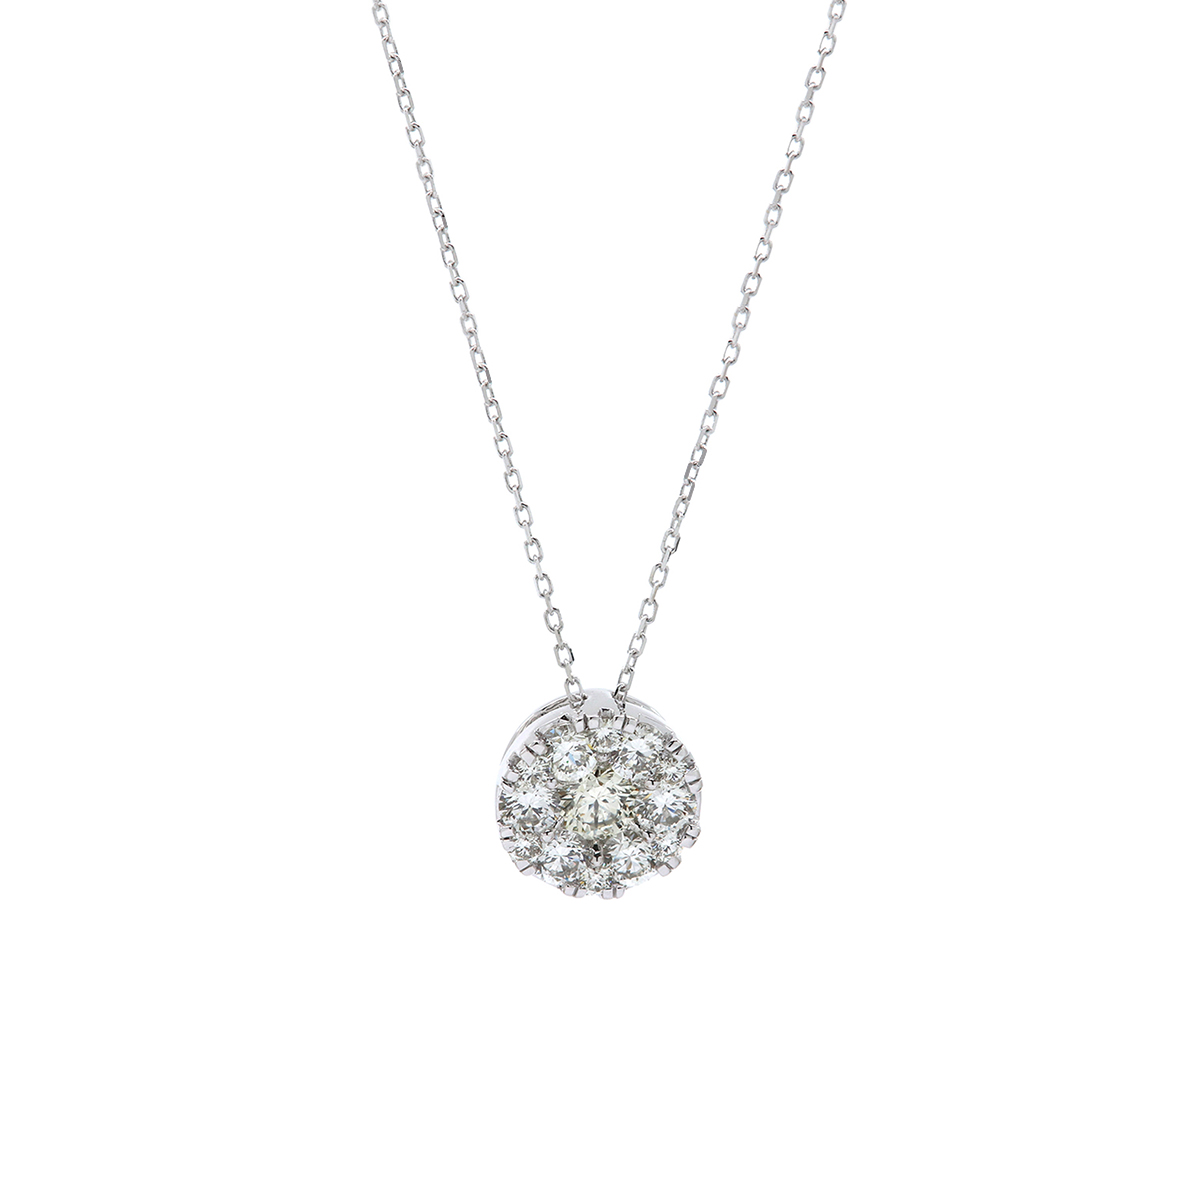 14K White Gold Diamond Cluster Pendant with Chain